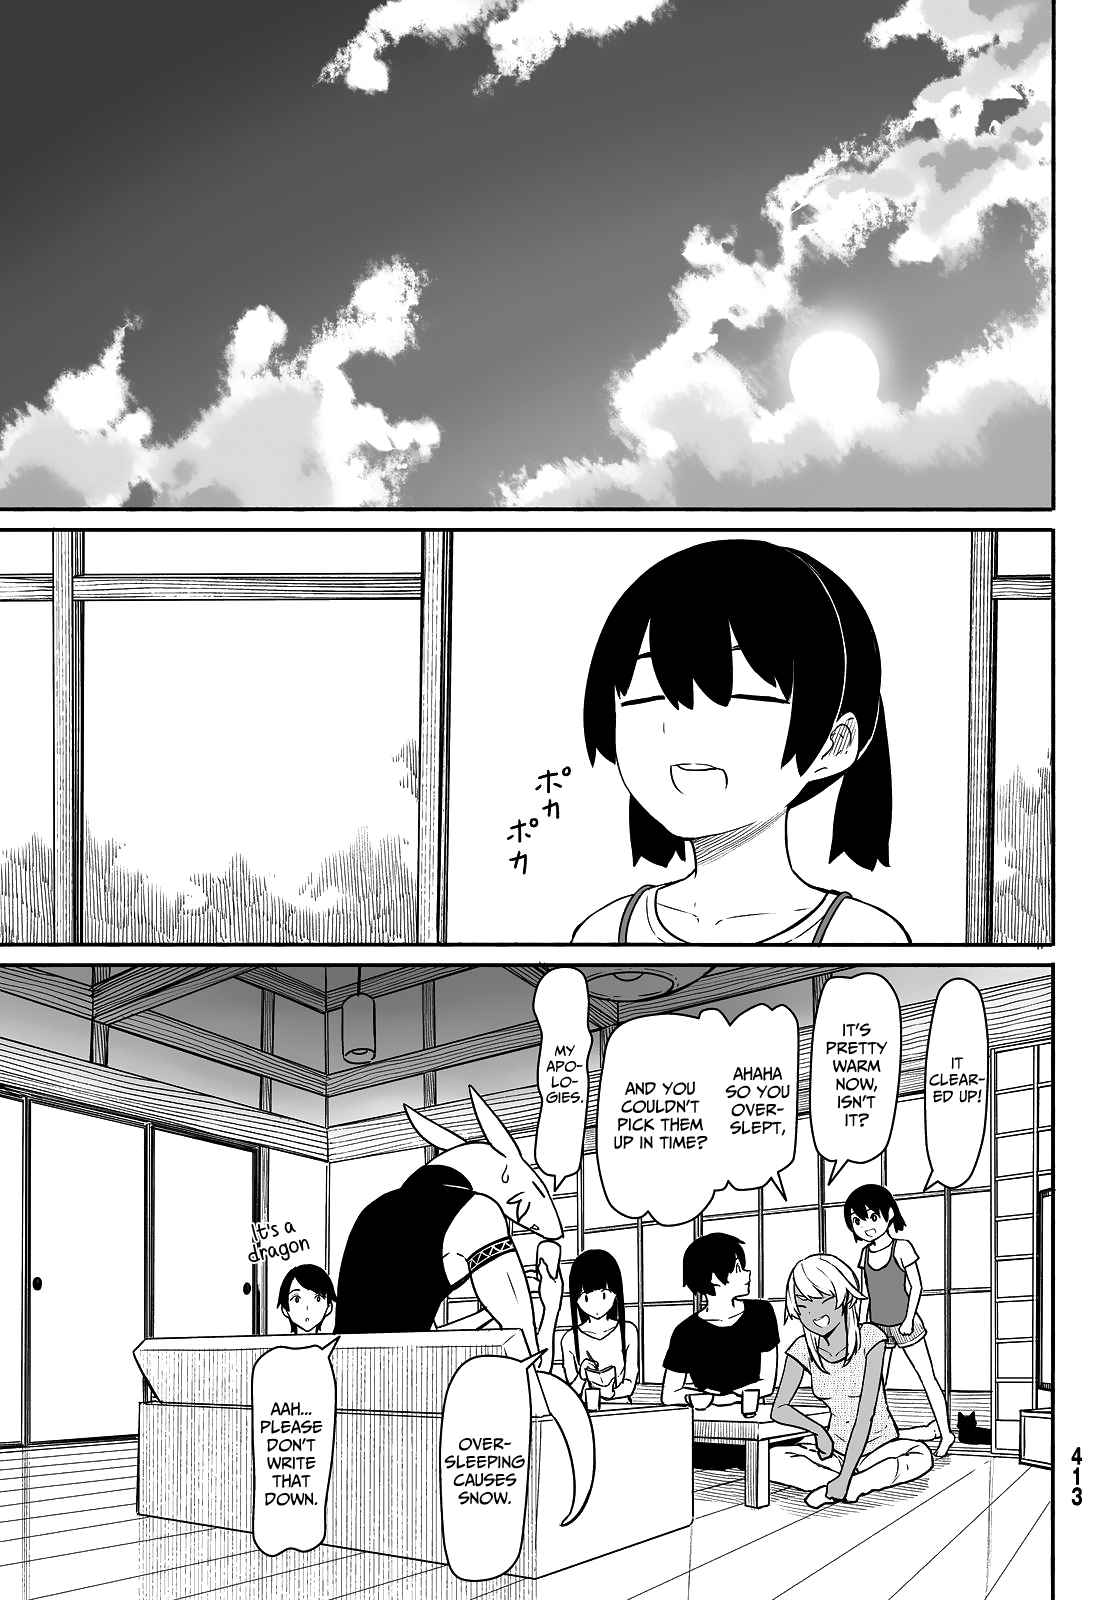 Flying Witch Ch.32